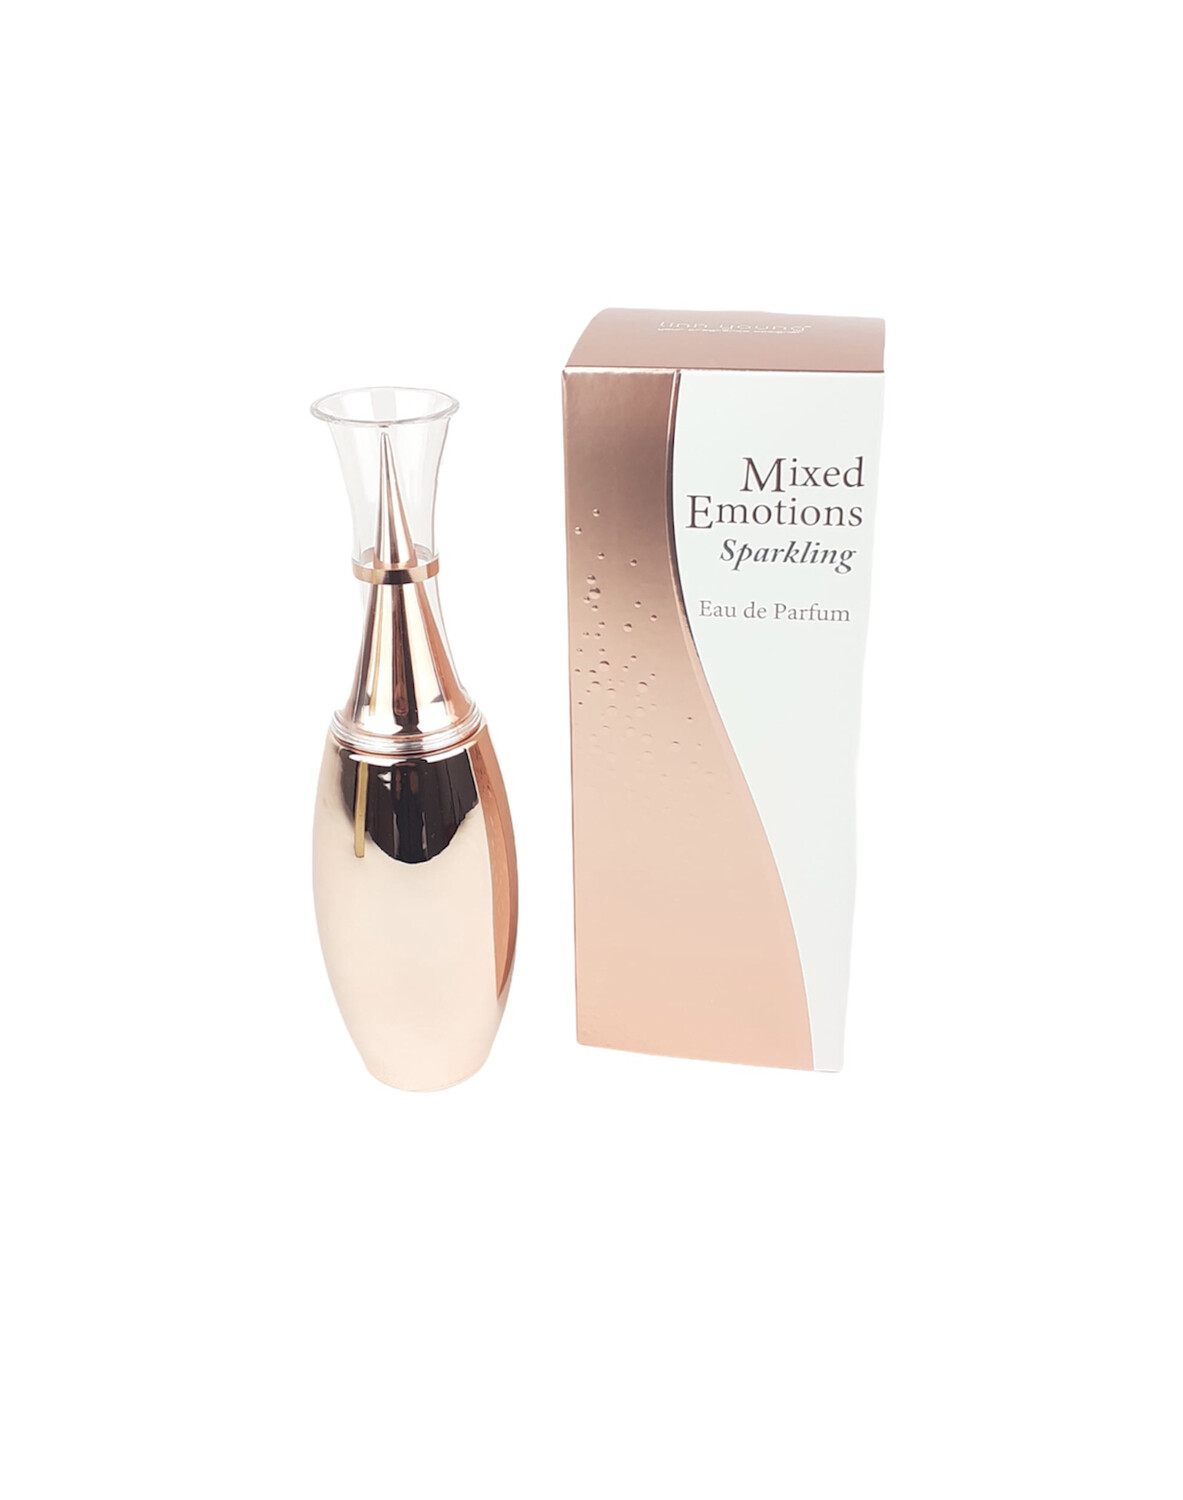 Mixed Emotions Sparkling 100ml EDP